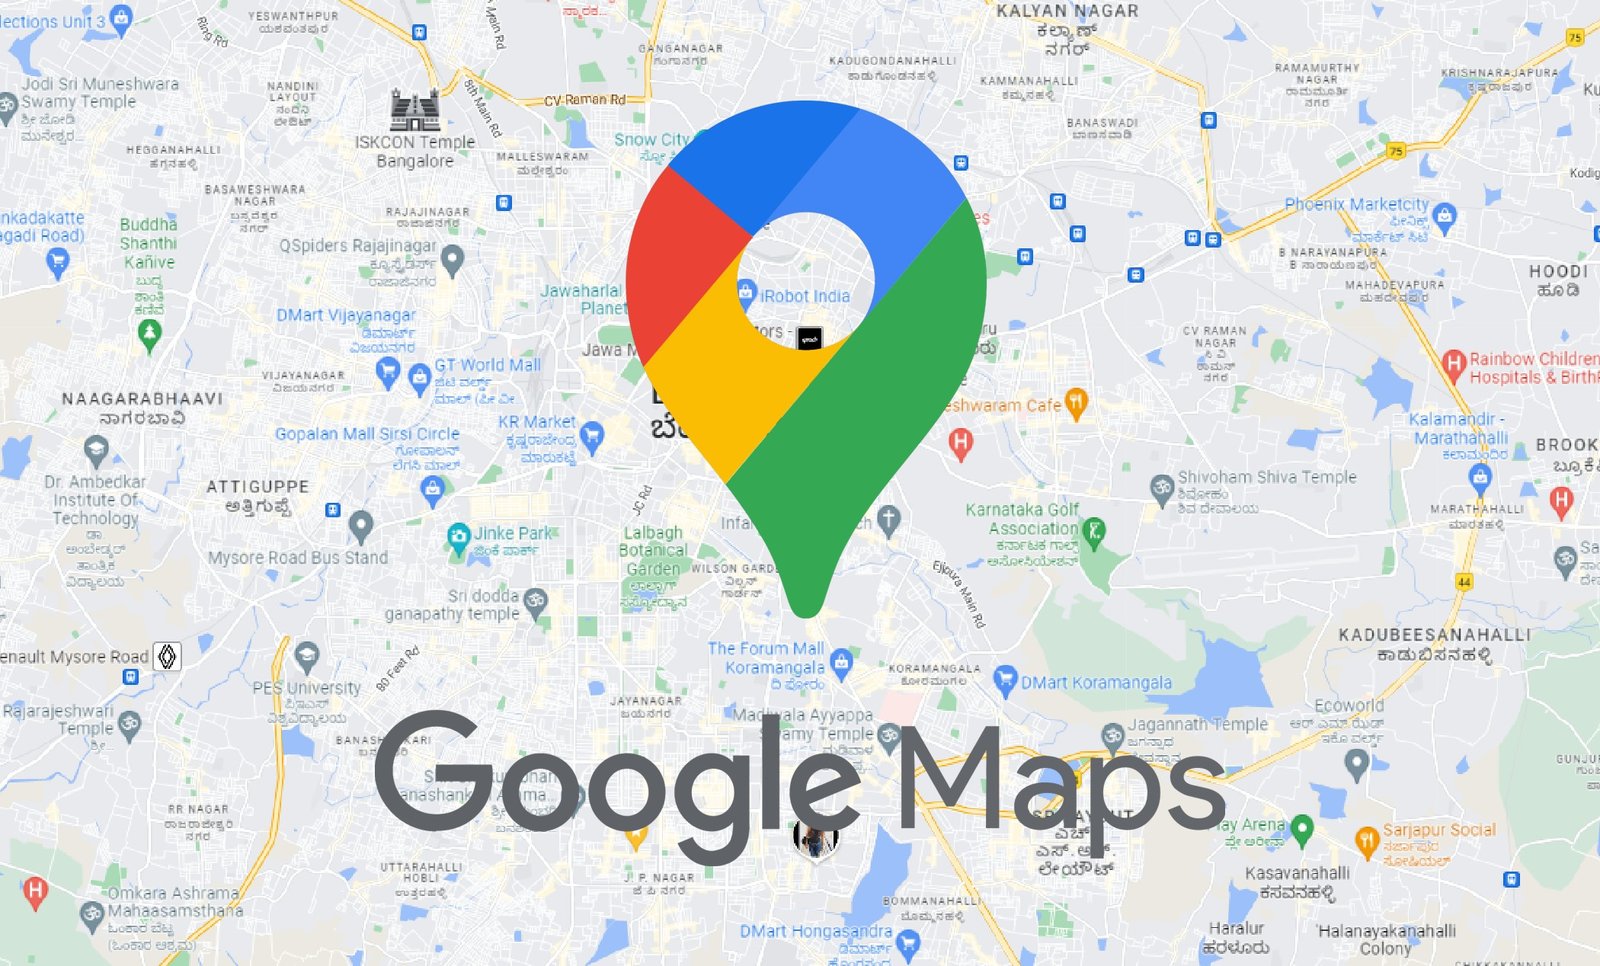 Google Maps Rolls Out New Features for Holiday Travel